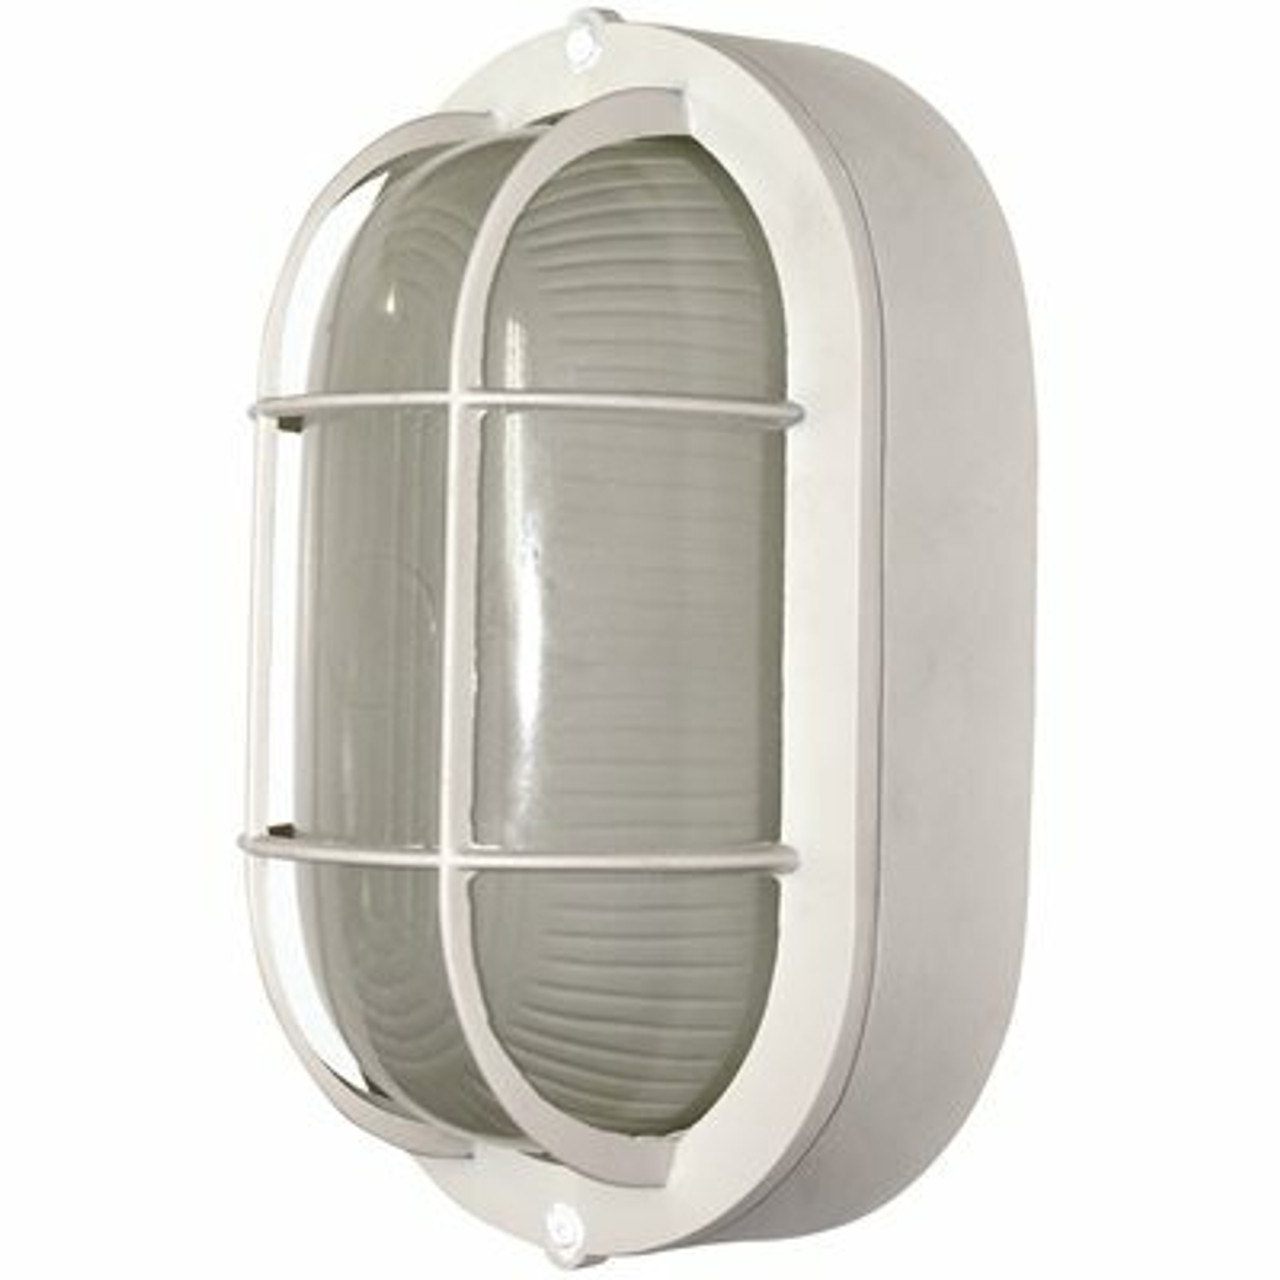 Royal Cove Medium 1-Light White Outdoor Wall Or Ceiling Mounted Fixture Bulkhead With Frosted Glass